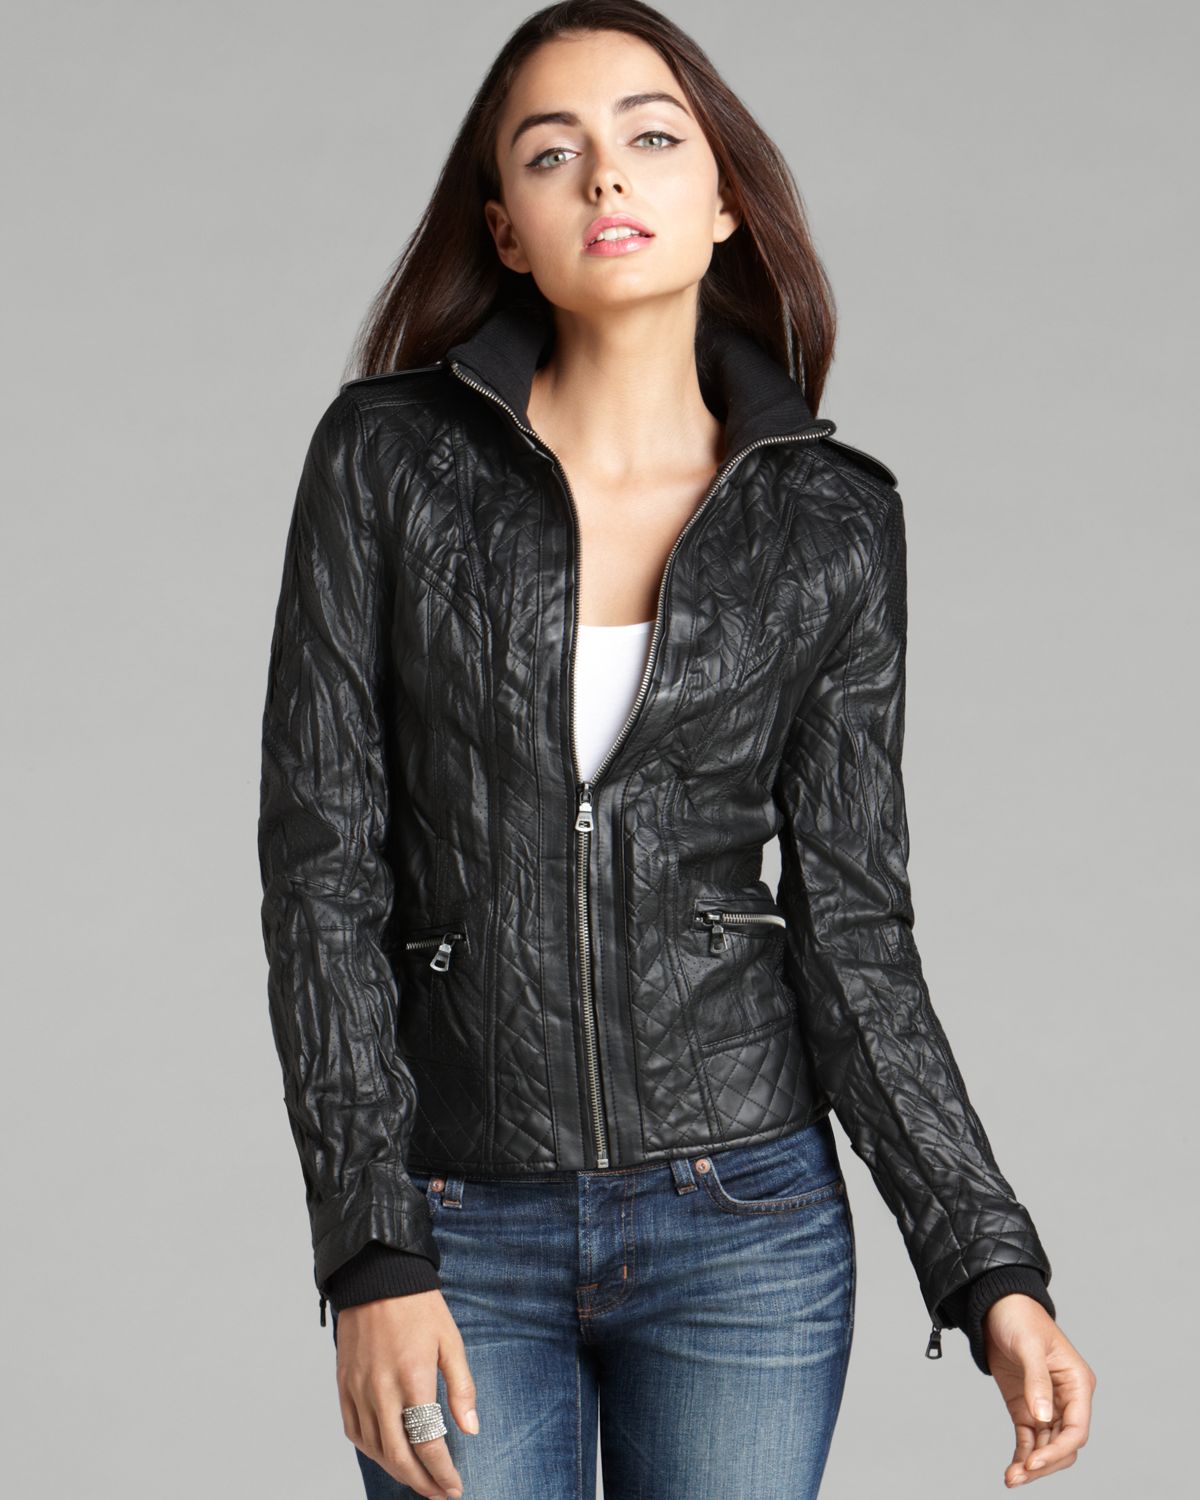 guess ladies leather jacket